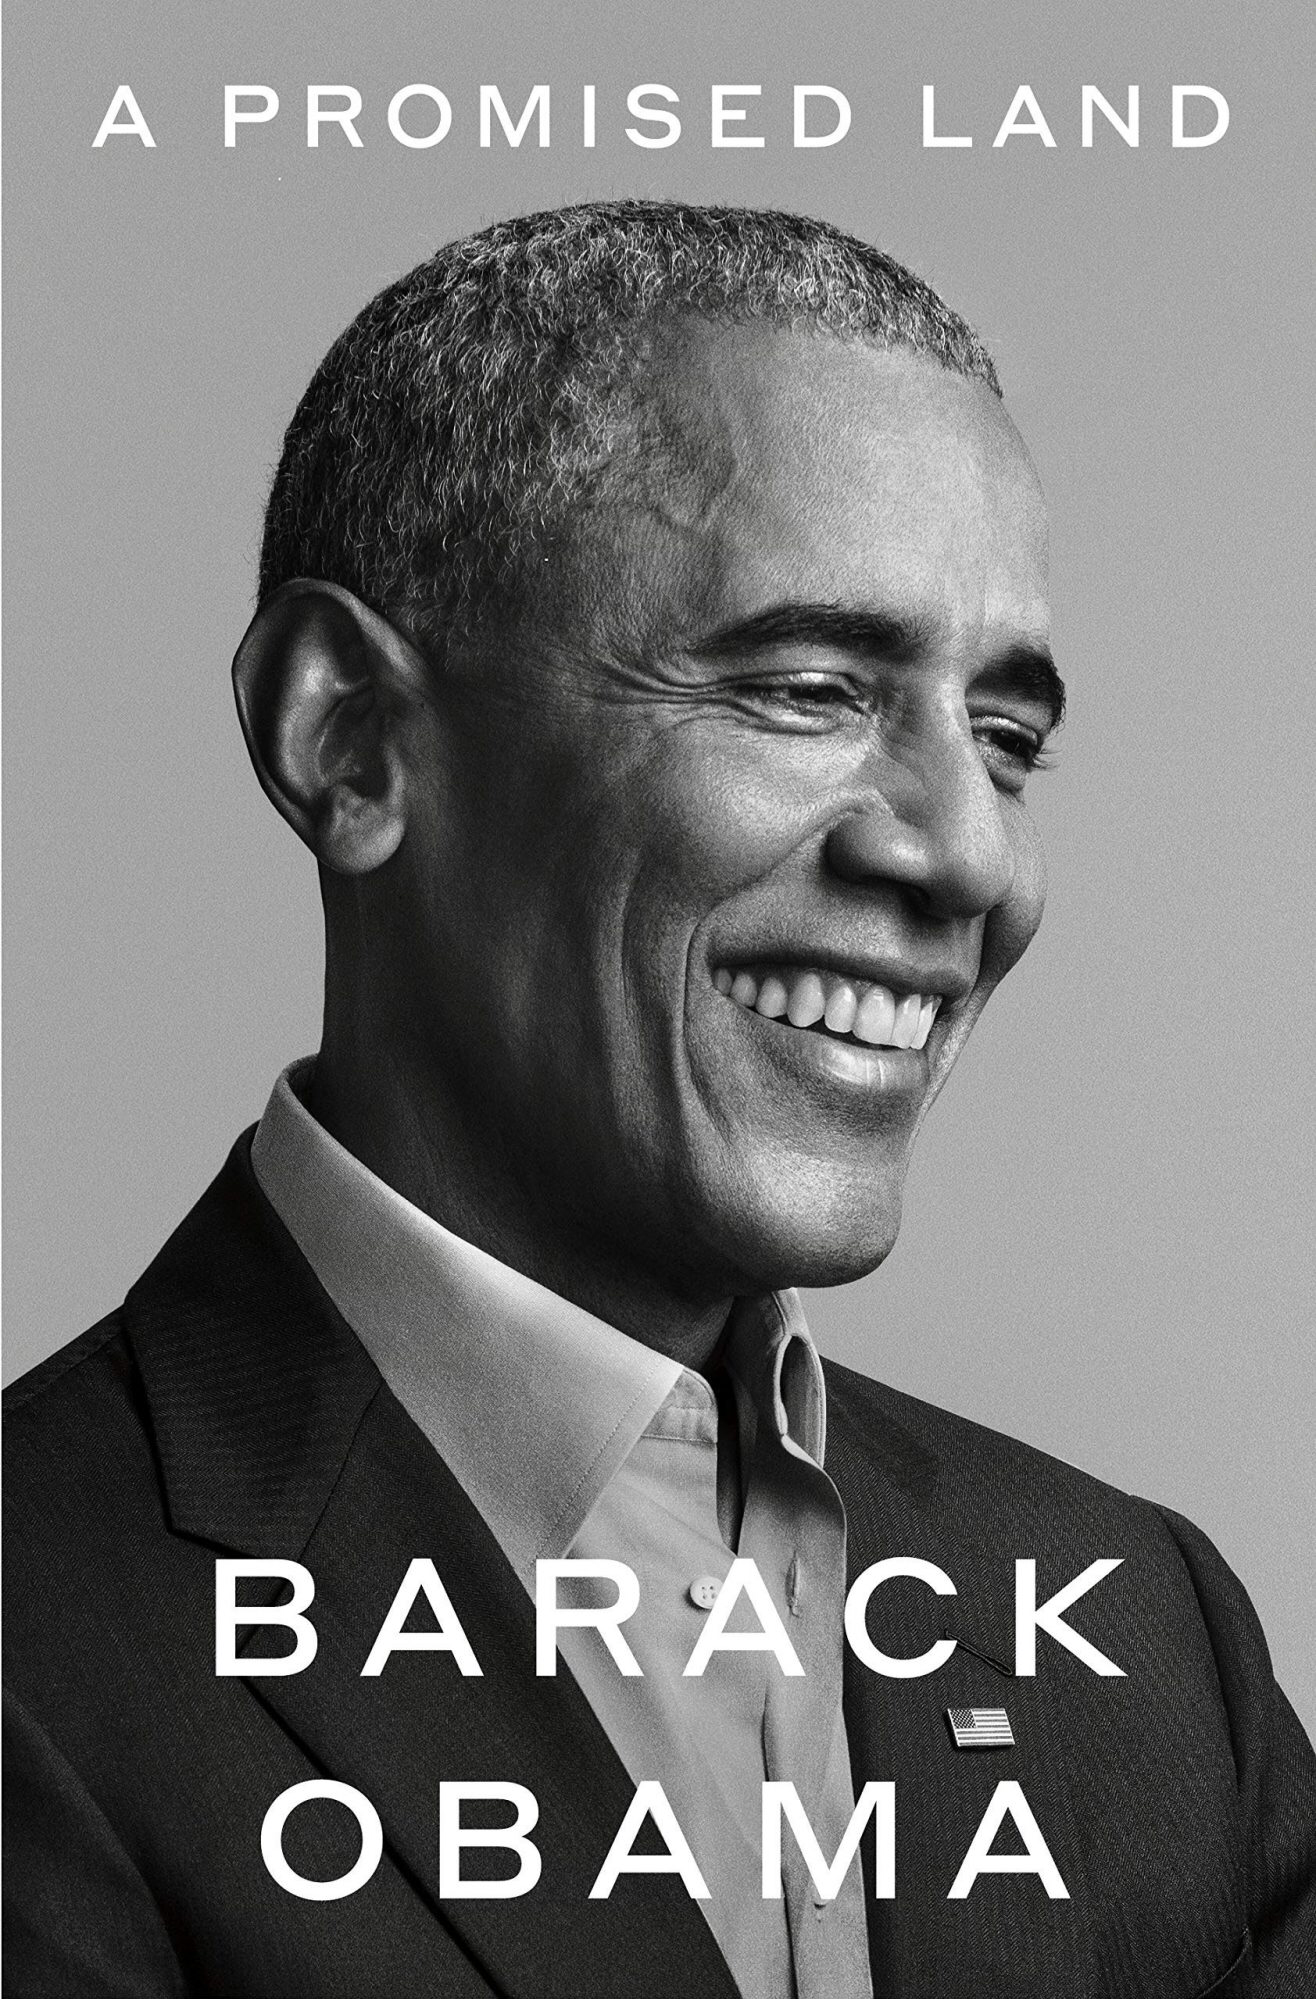 Barrack-Obama-InStyle-magazine-January-issue-A-promised-land-book